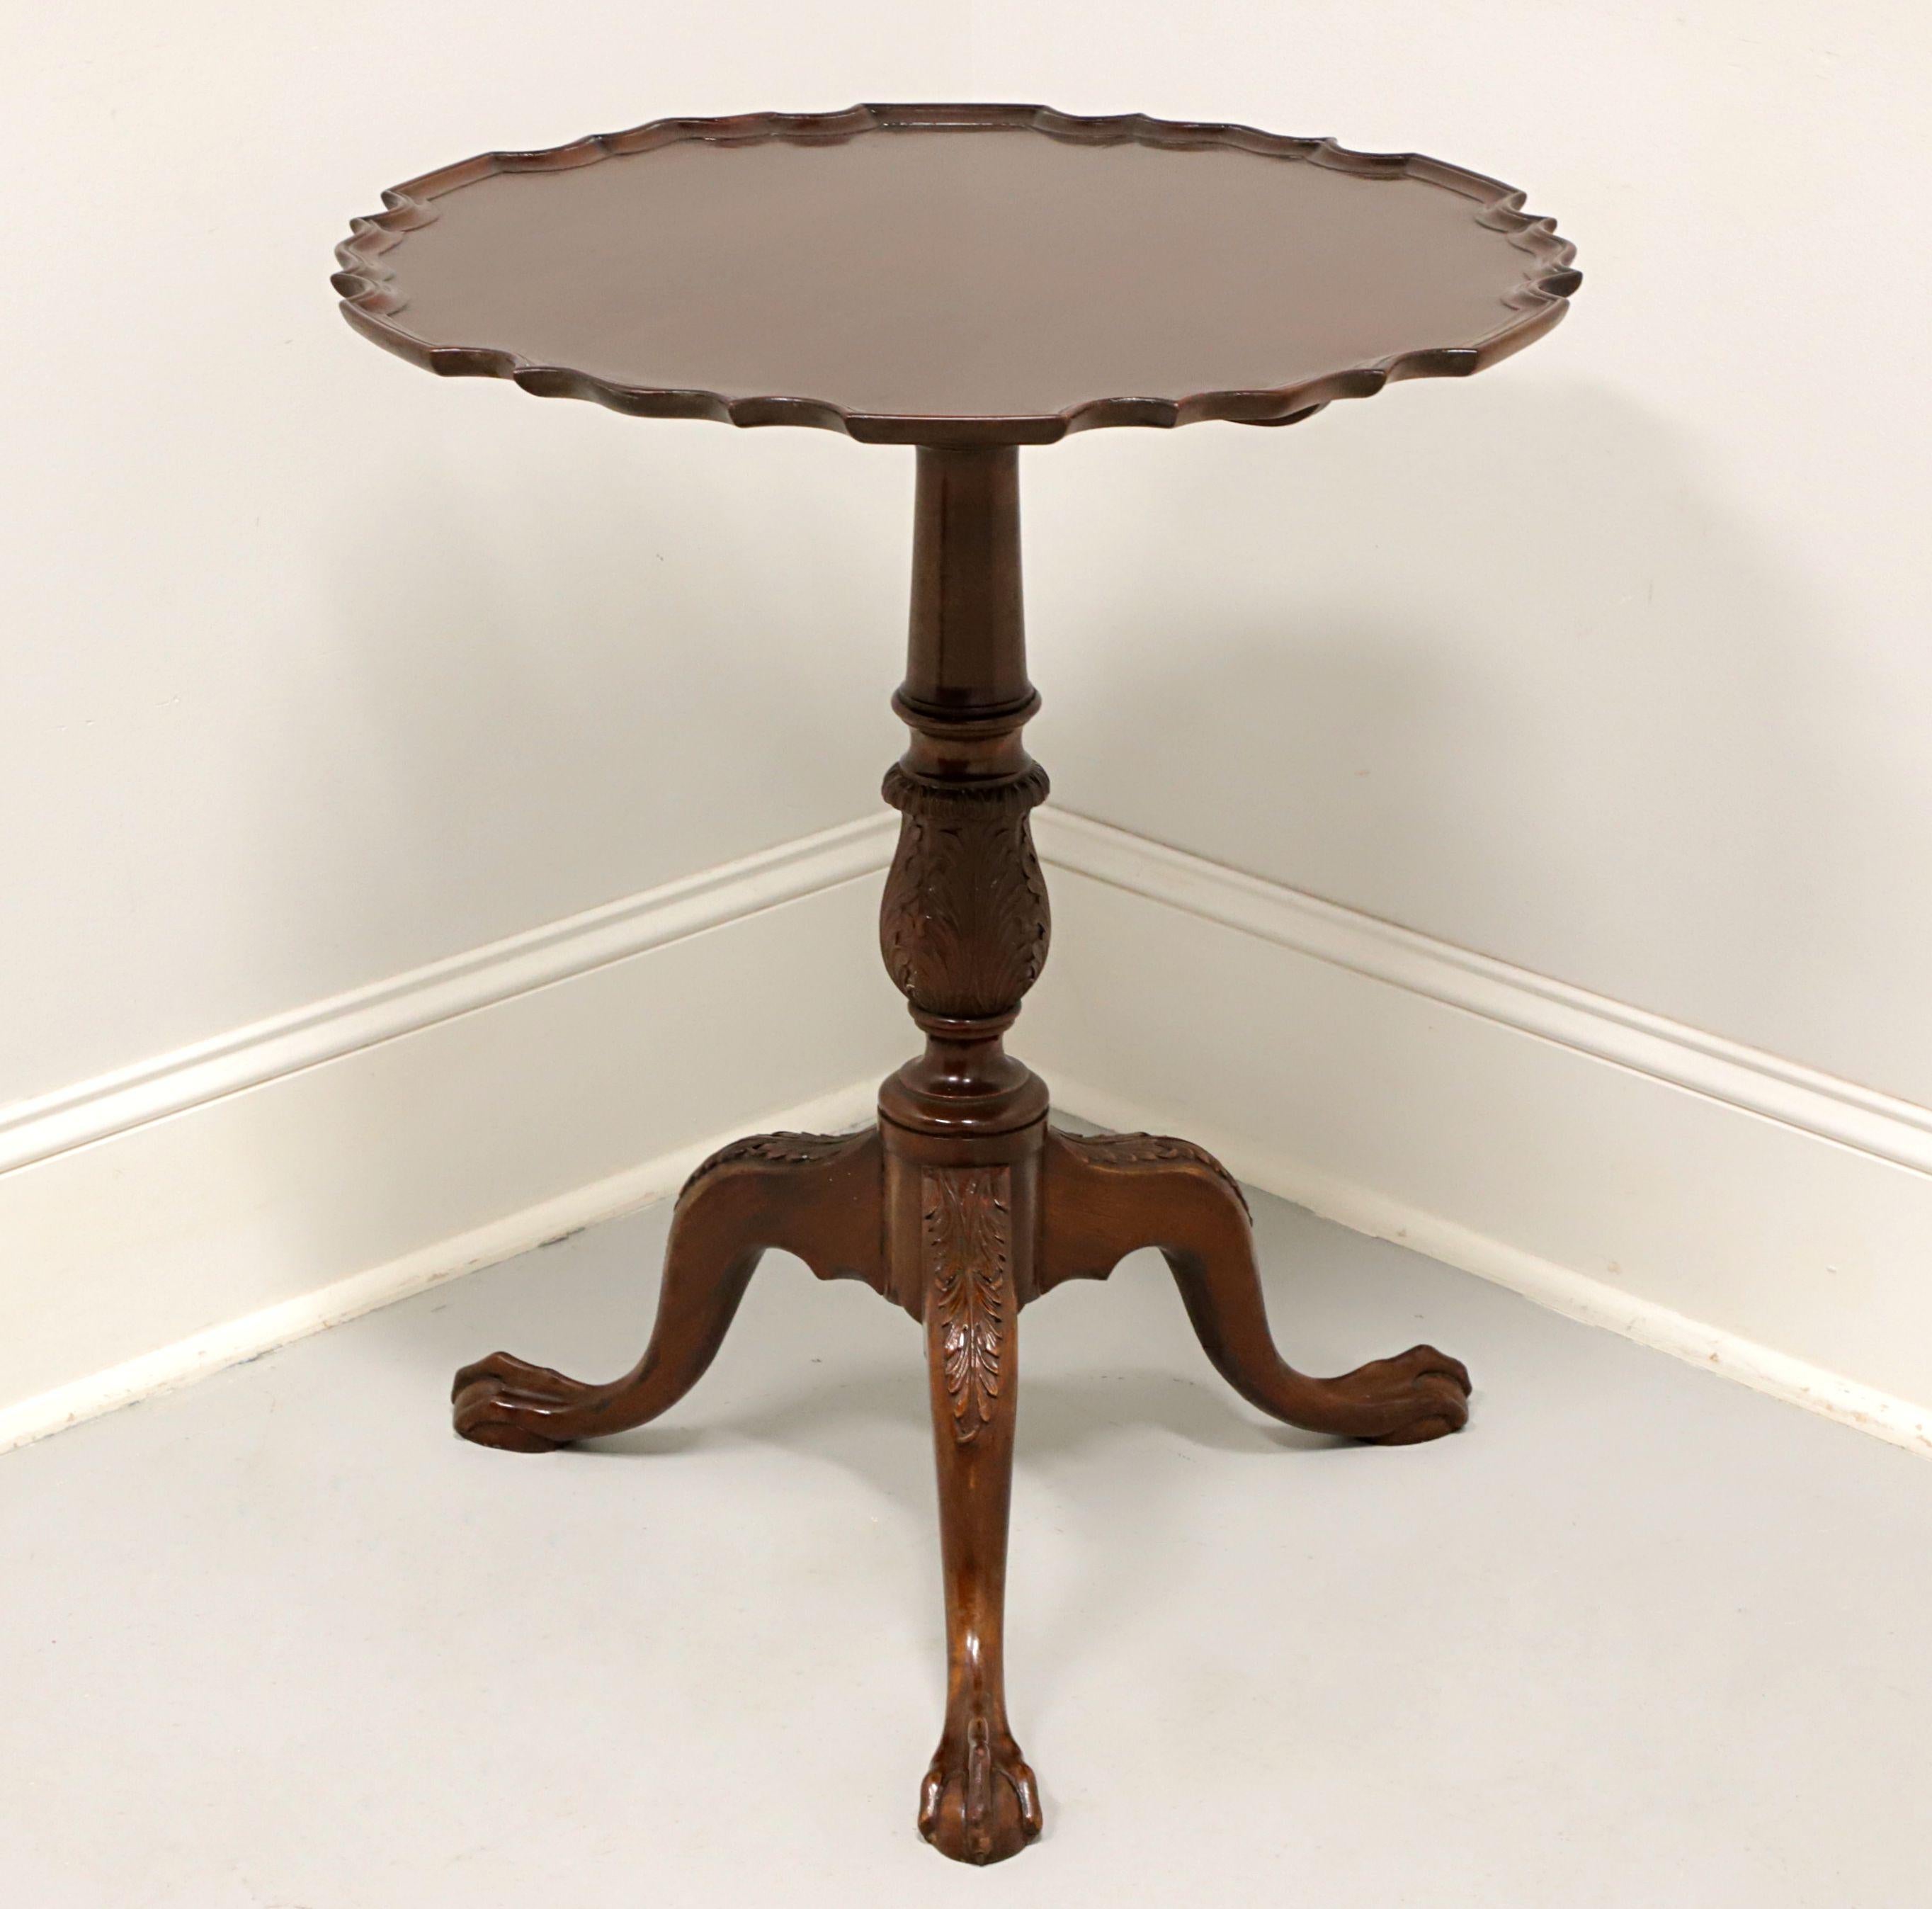 A Chippendale style tilt-top pie crust table, unbranded, similar quality to Craftique or Henkel Harris. Solid mahogany with scalloped edge top, tilt mechanism, brass latch, turned & fluted pedestal, three legs with acanthus leaf carved knees, and